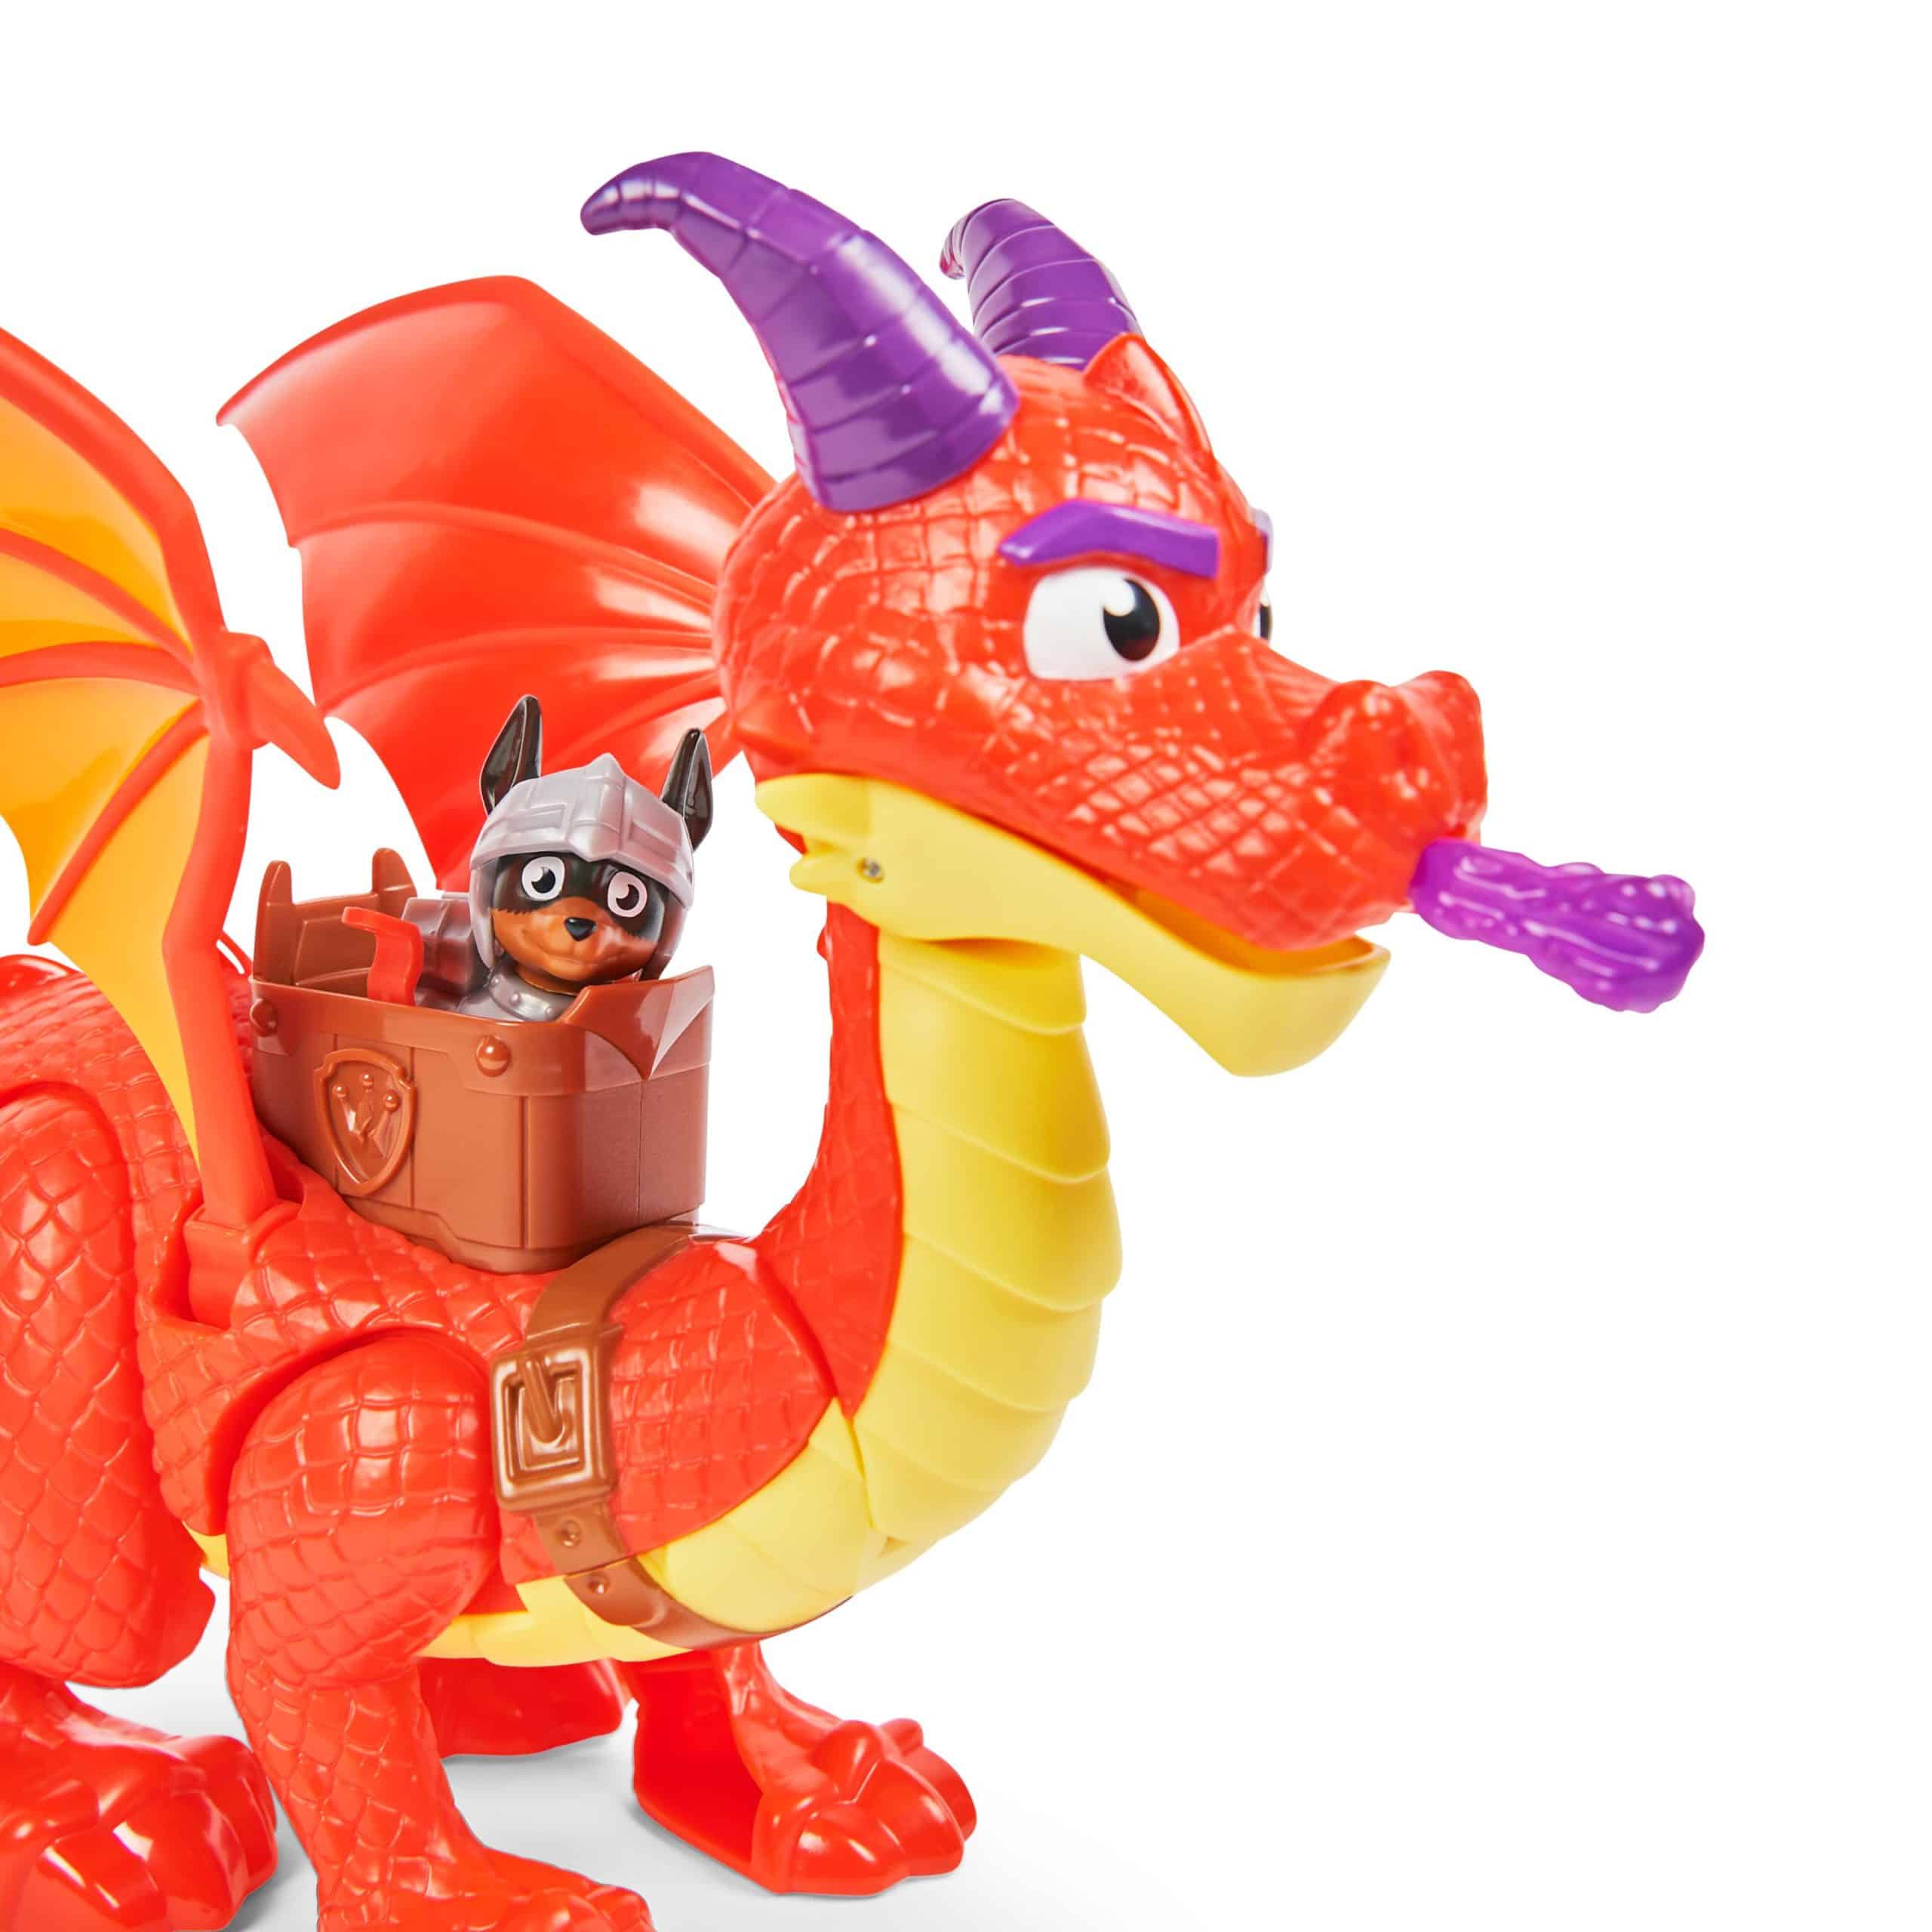 Spin Master Paw Patrol - Rescue Knights - Sparks The Dragon With Claw